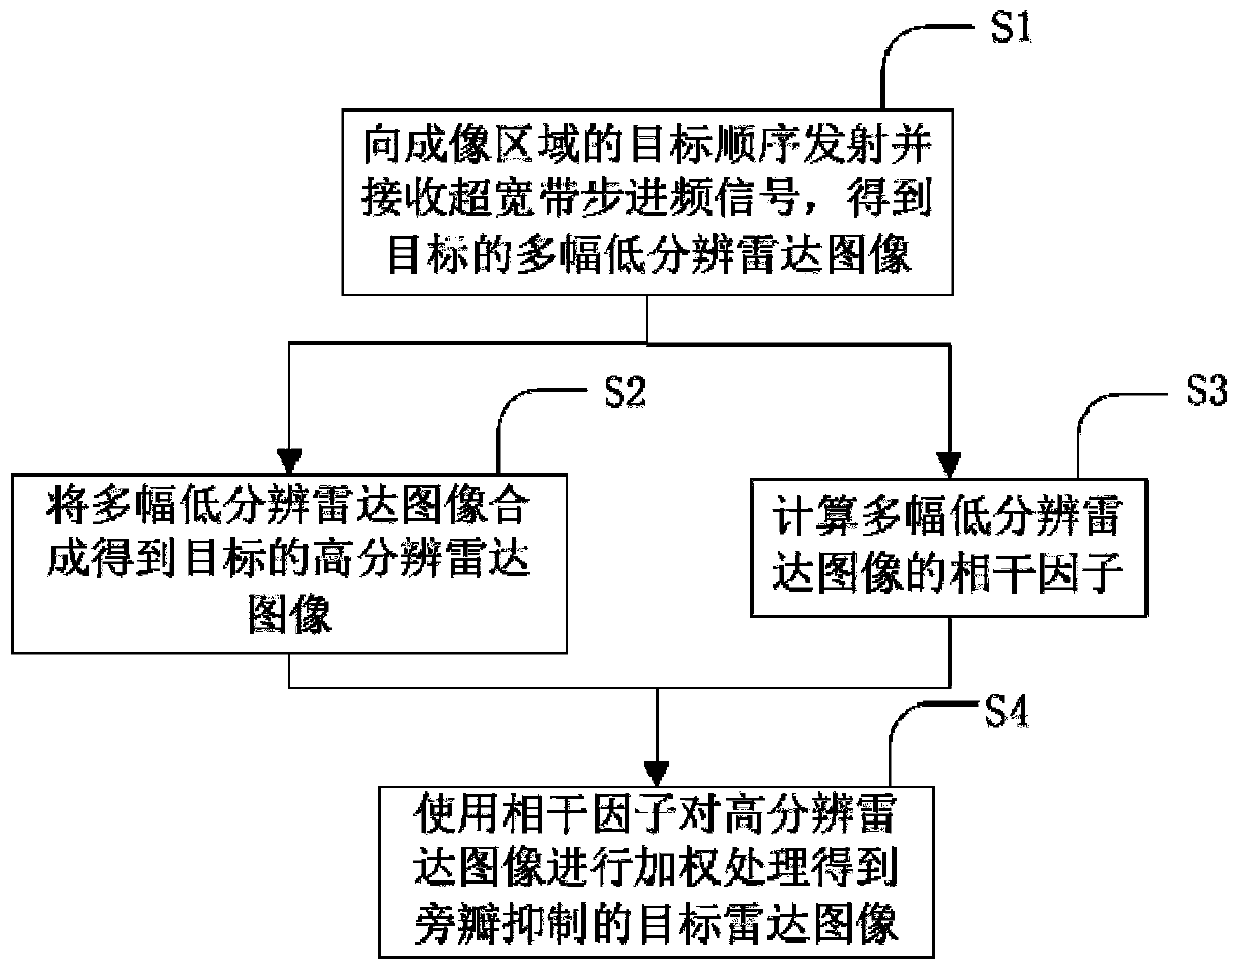 Online sidelobe suppression method and system for ultra-wideband step frequency MIMO radar